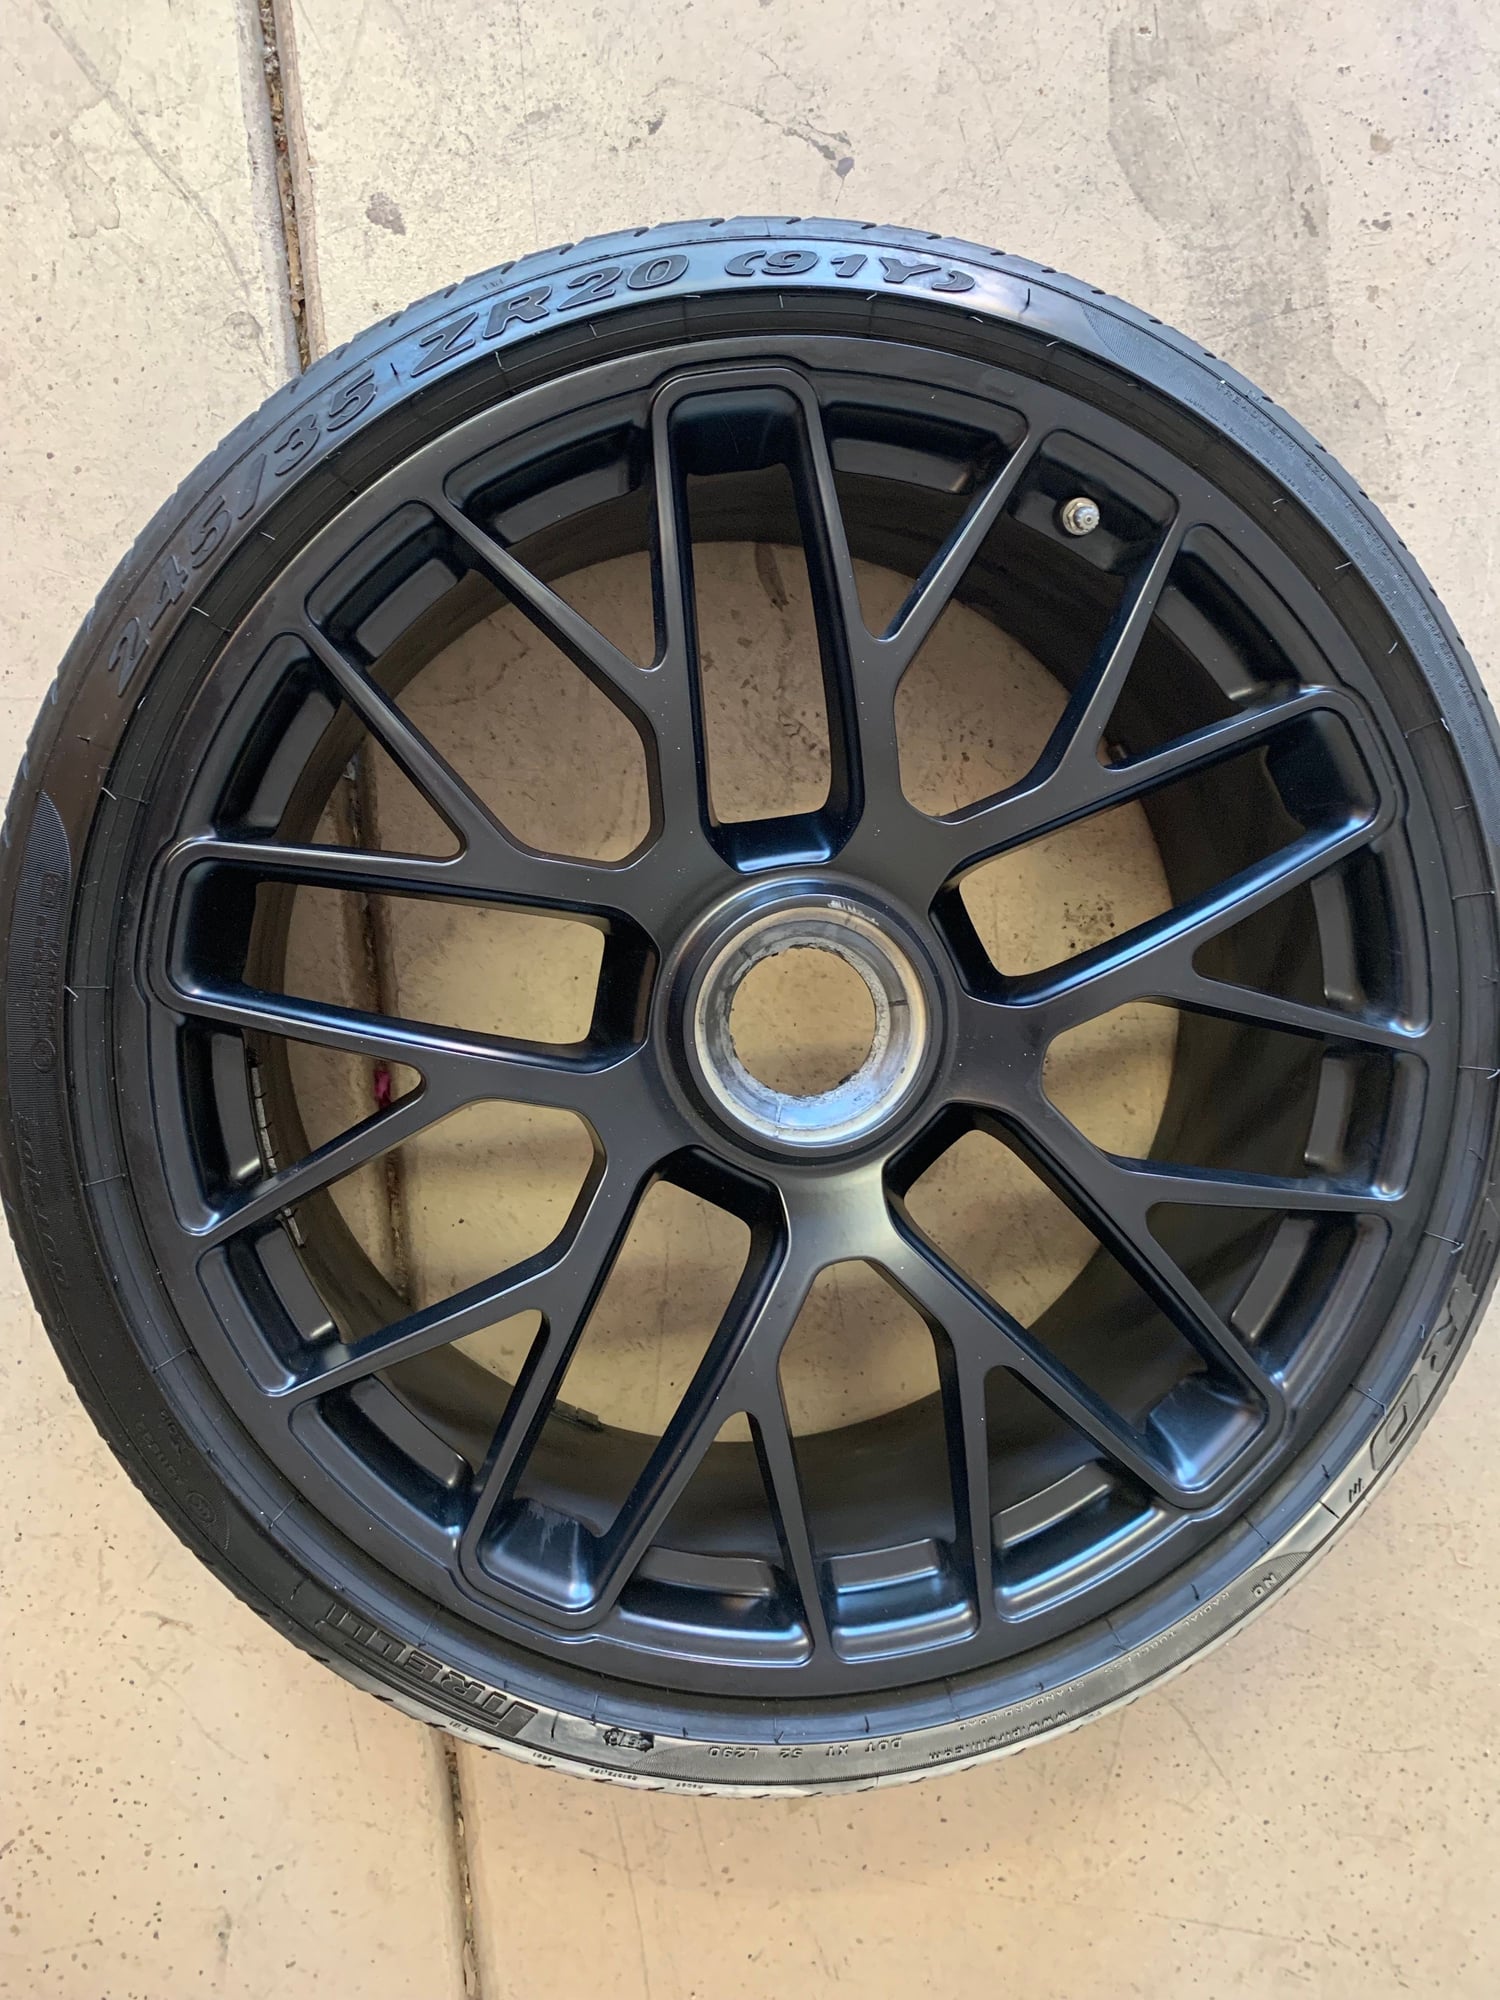 Wheels and Tires/Axles - 991 Turbo S Wheels finished in matte black w/ Tires - Used - 2014 to 2018 Porsche 911 - Scottsdale, AZ 85260, United States